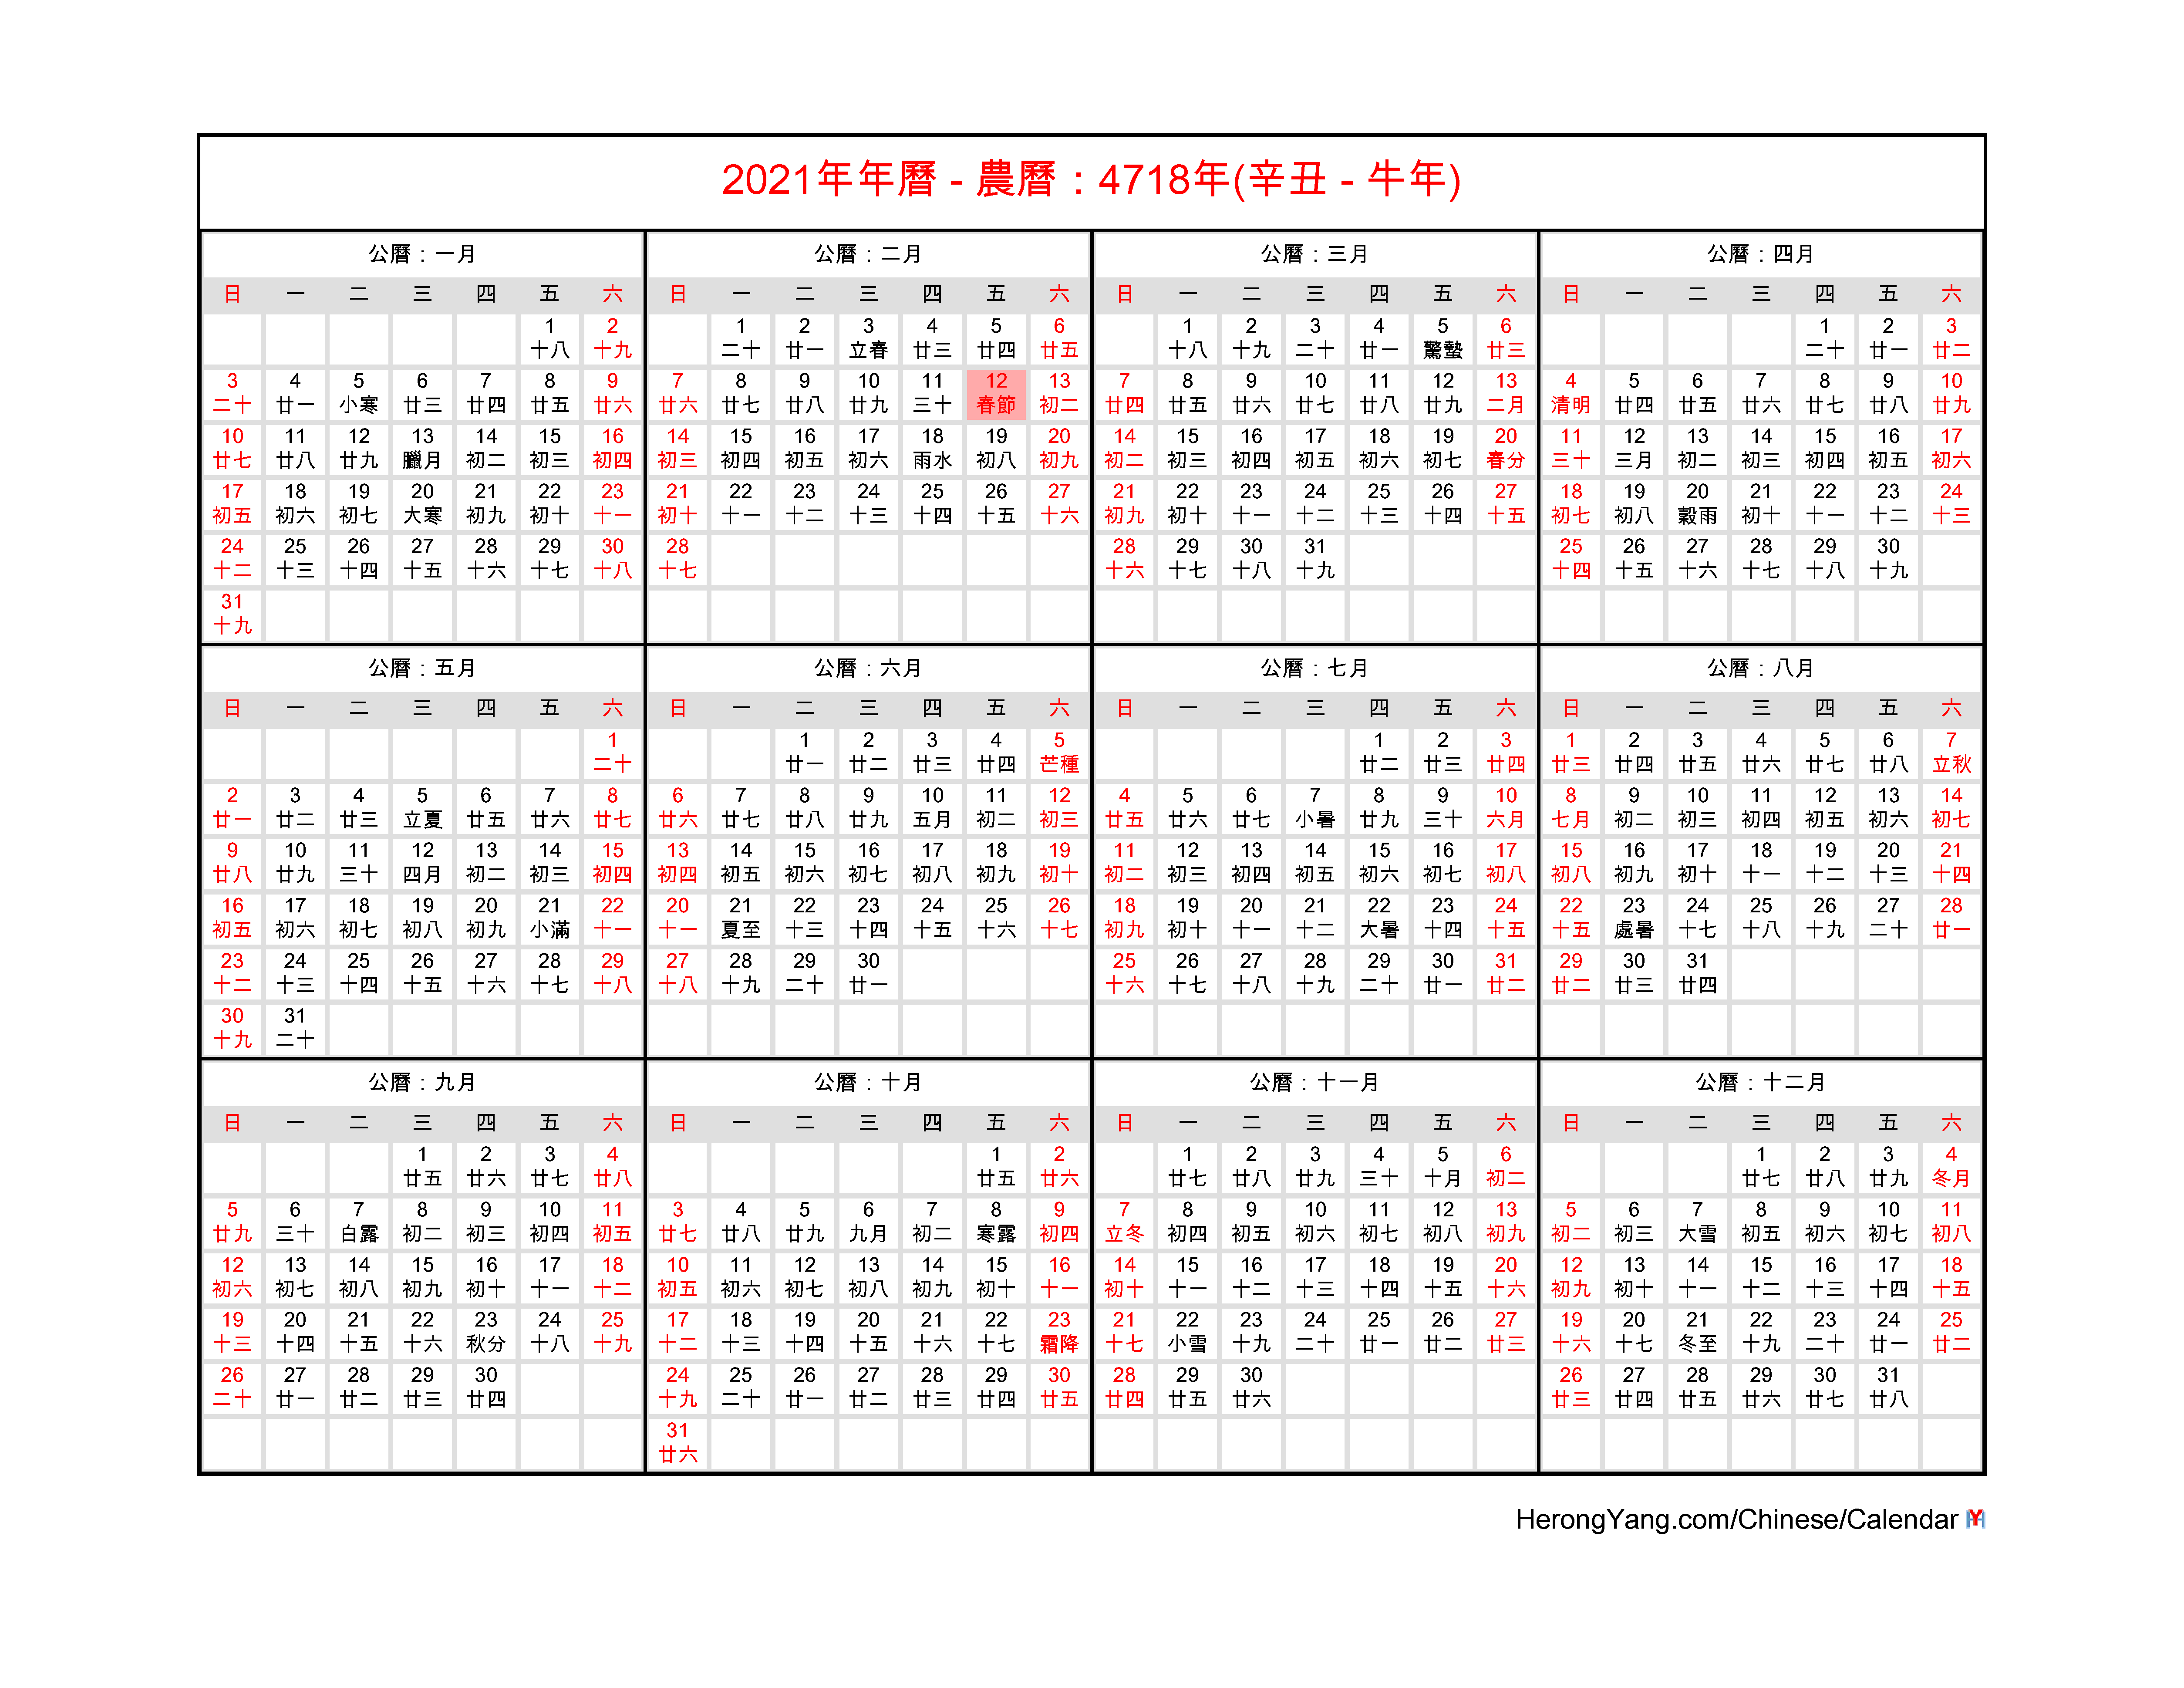 Chinese Calendar - Free Chinese Calendar 2021 - Year of the Ox